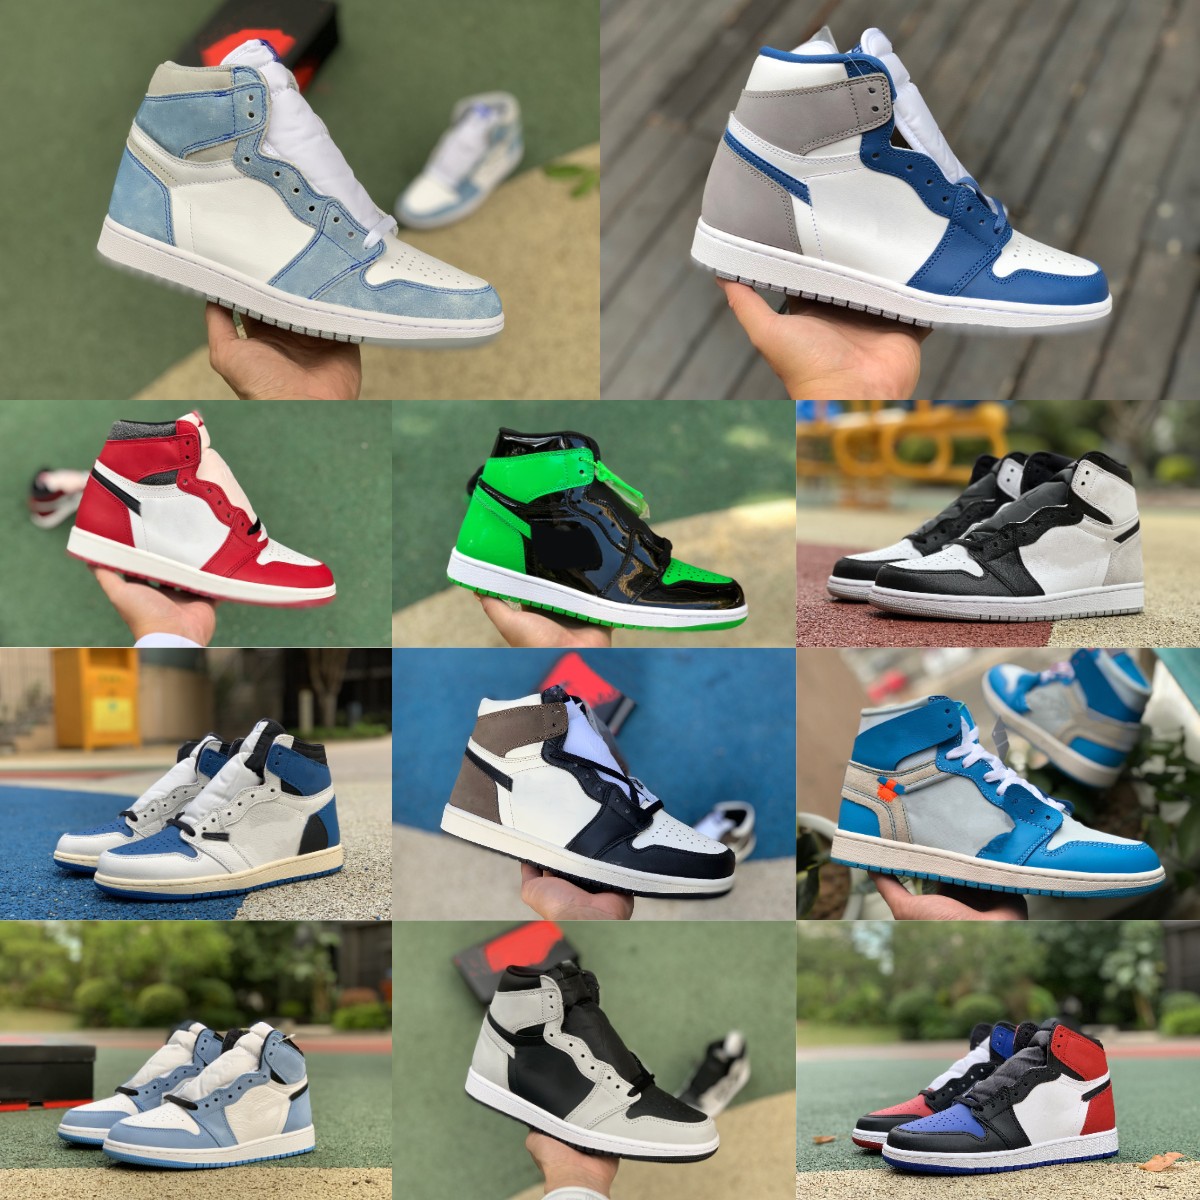 

Chicago Lost Found Jumpman 1 1s Basketball Shoes True Turbo Blue Pine Green Stealth Denim Visionaire Stage Haze Hyper Royal Bio Hack TWIST Designer Sports Sneakers, Please contact us